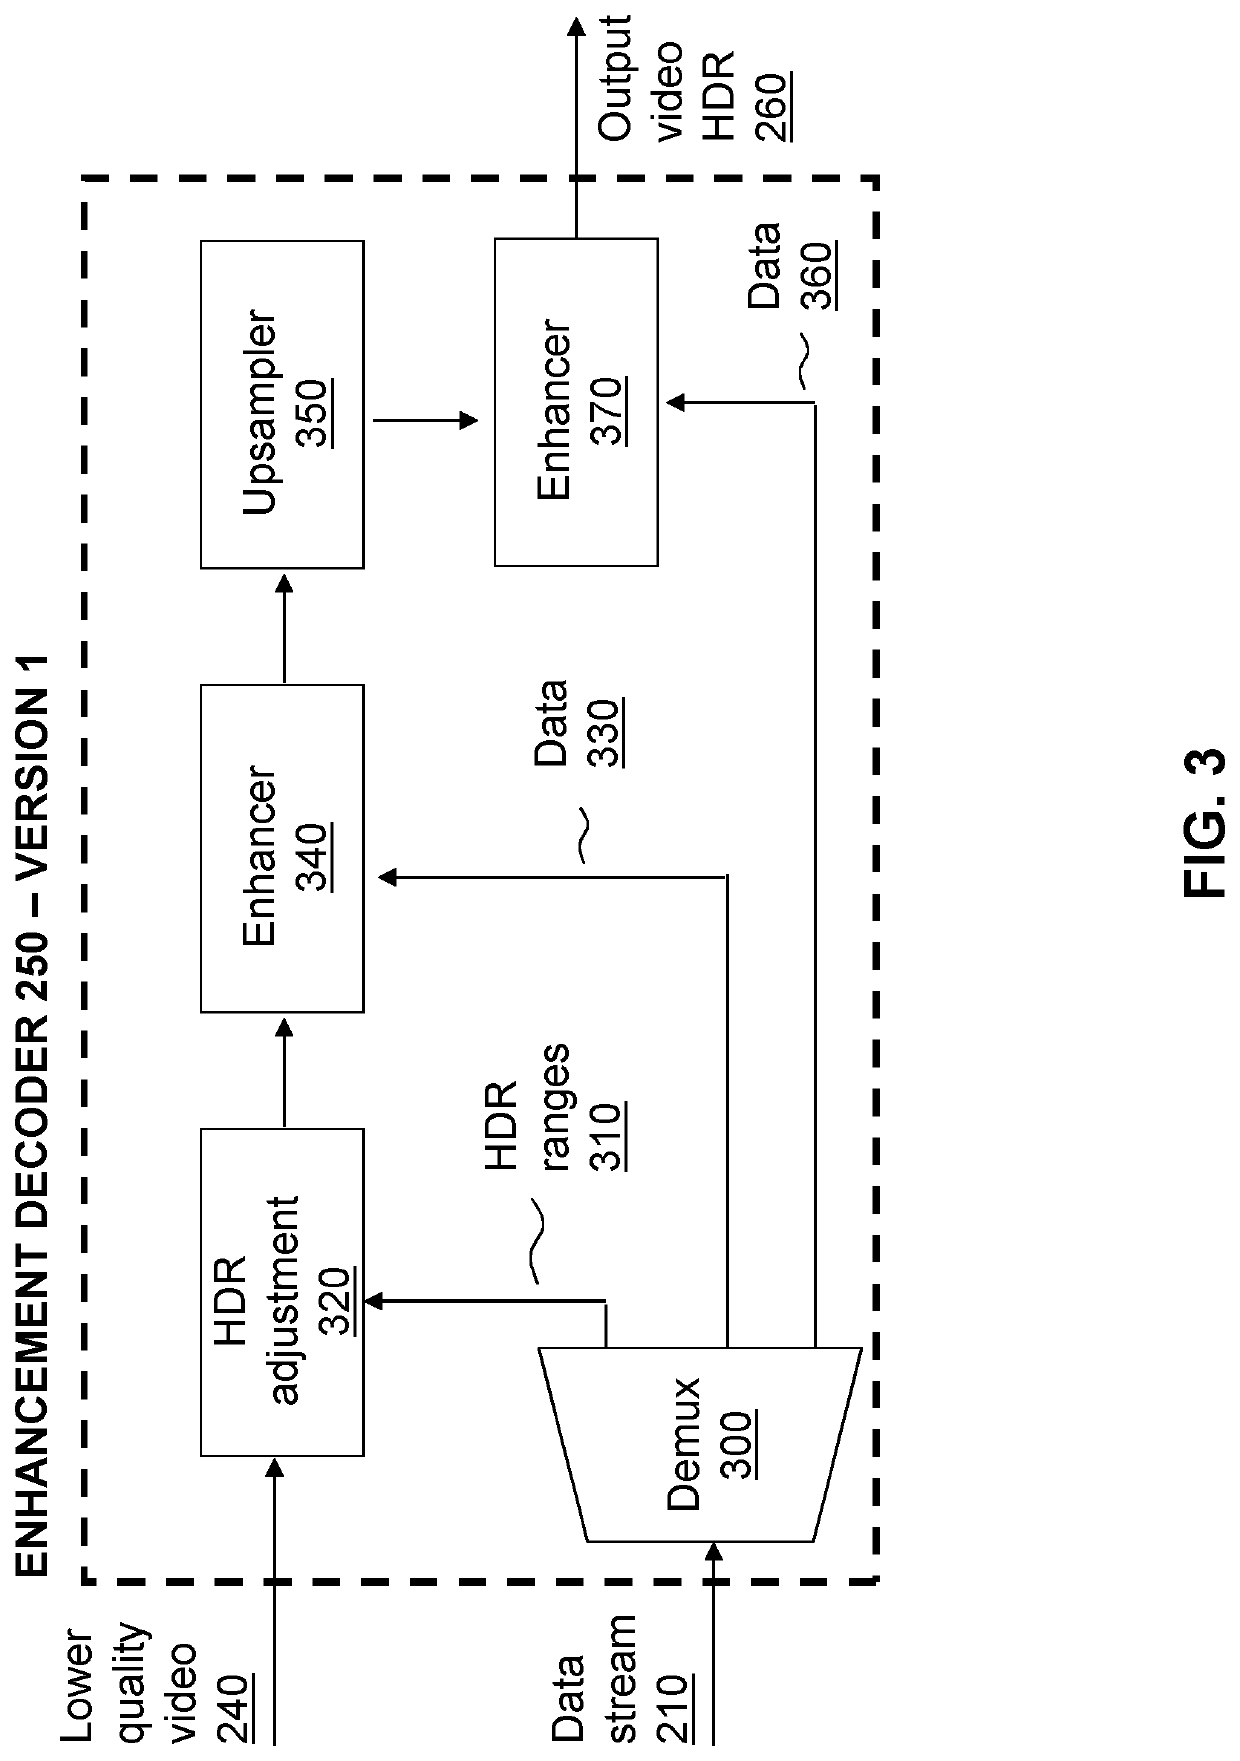 Dynamic range support within a multi-layer hierarchical coding scheme